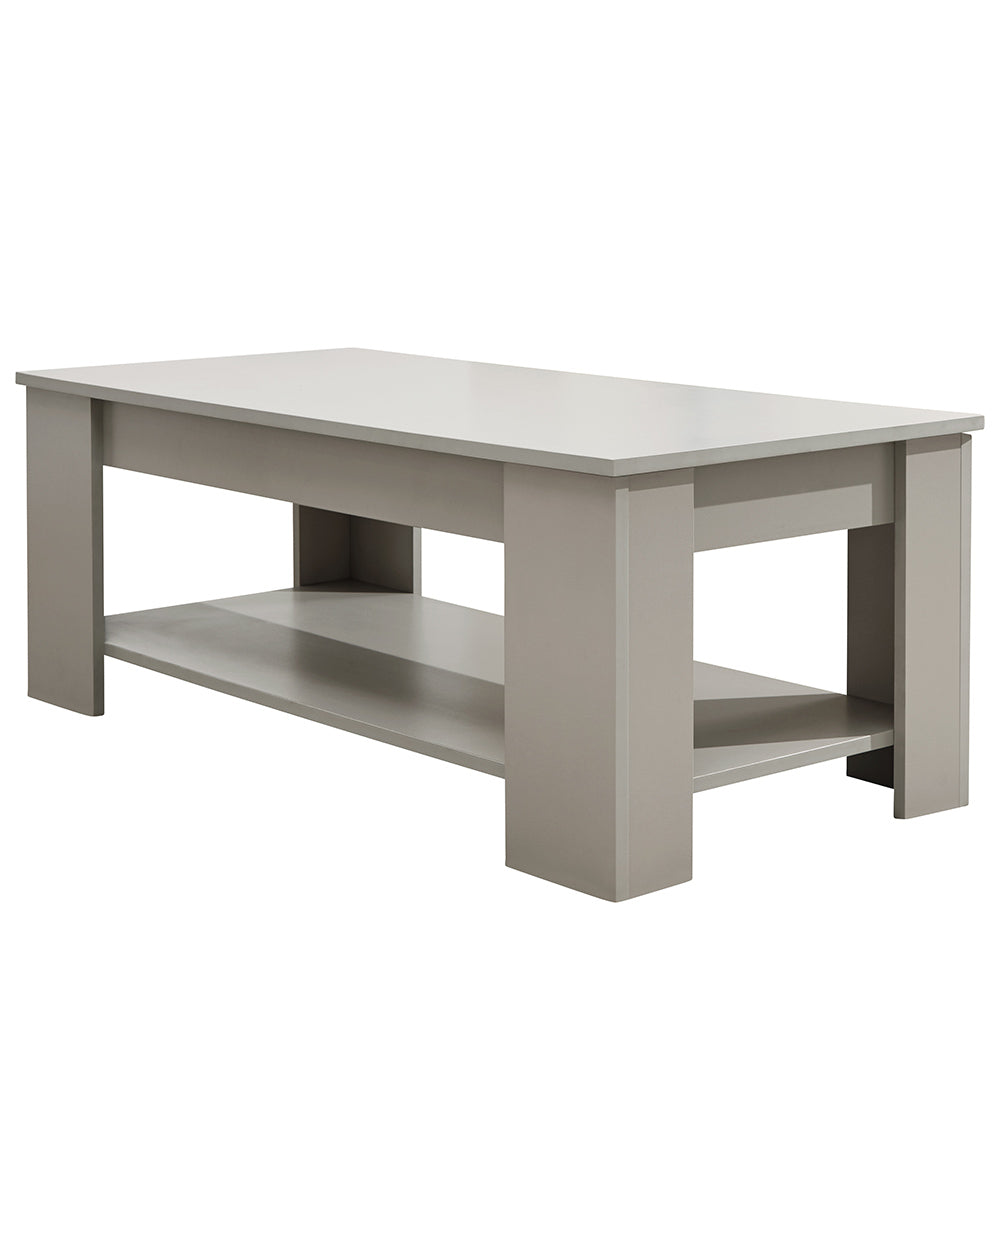 Lift up coffee table in grey on a white background